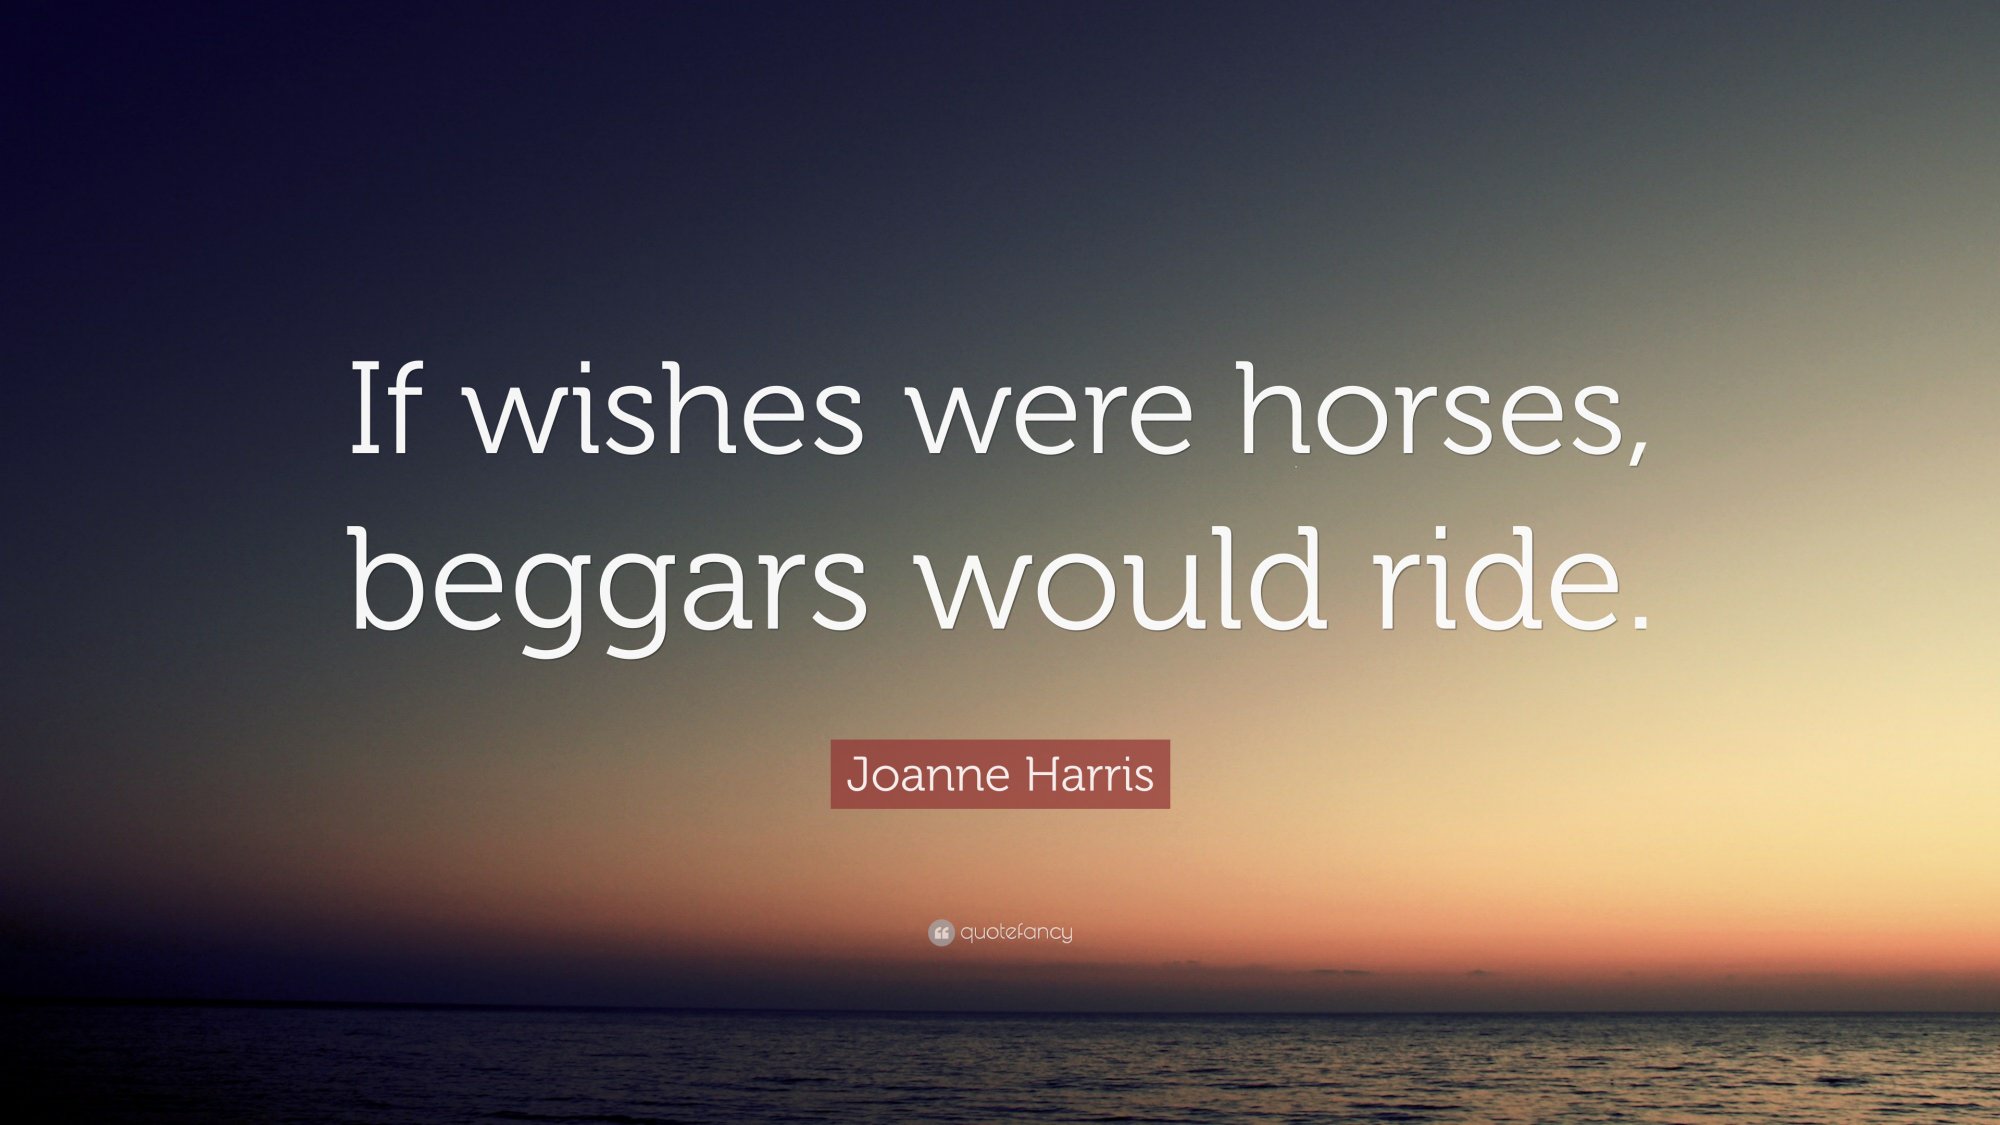 2515941-Joanne-Harris-Quote-If-wishes-were-horses-beggars-would-ride.jpg